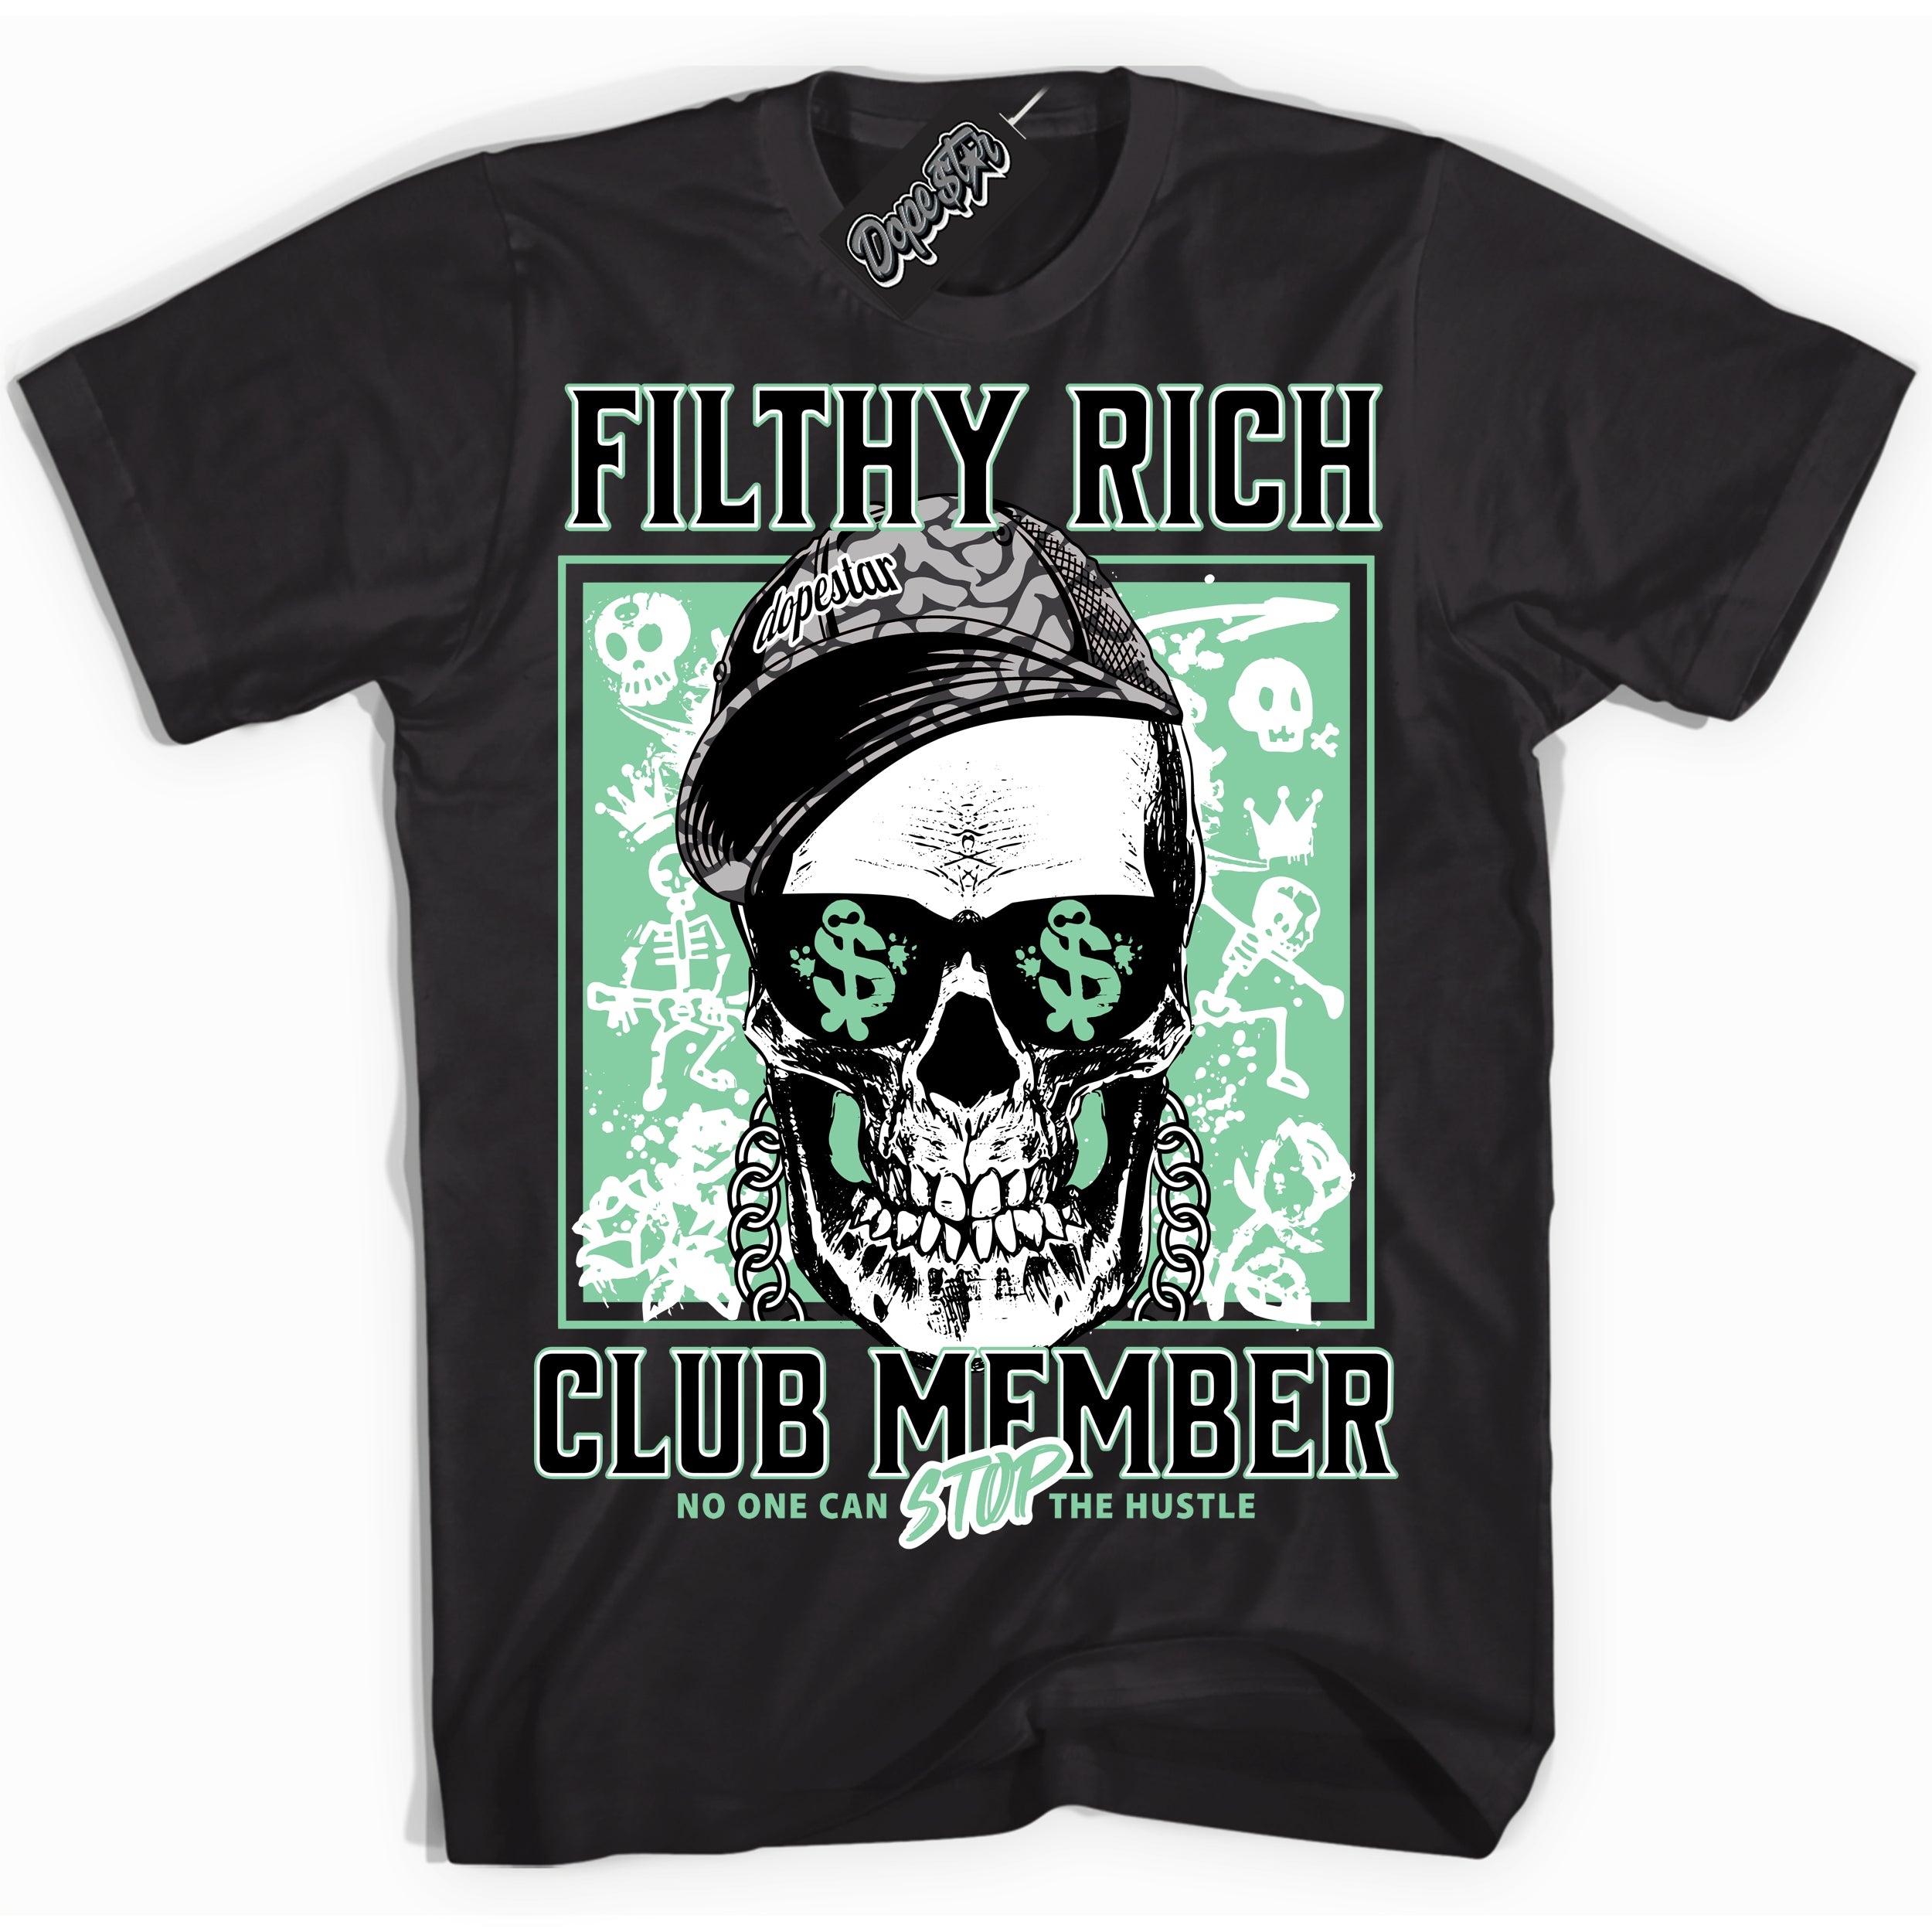 Cool Black Shirt with “ Filthy Rich” design that perfectly matches Green Glow 3s Sneakers.